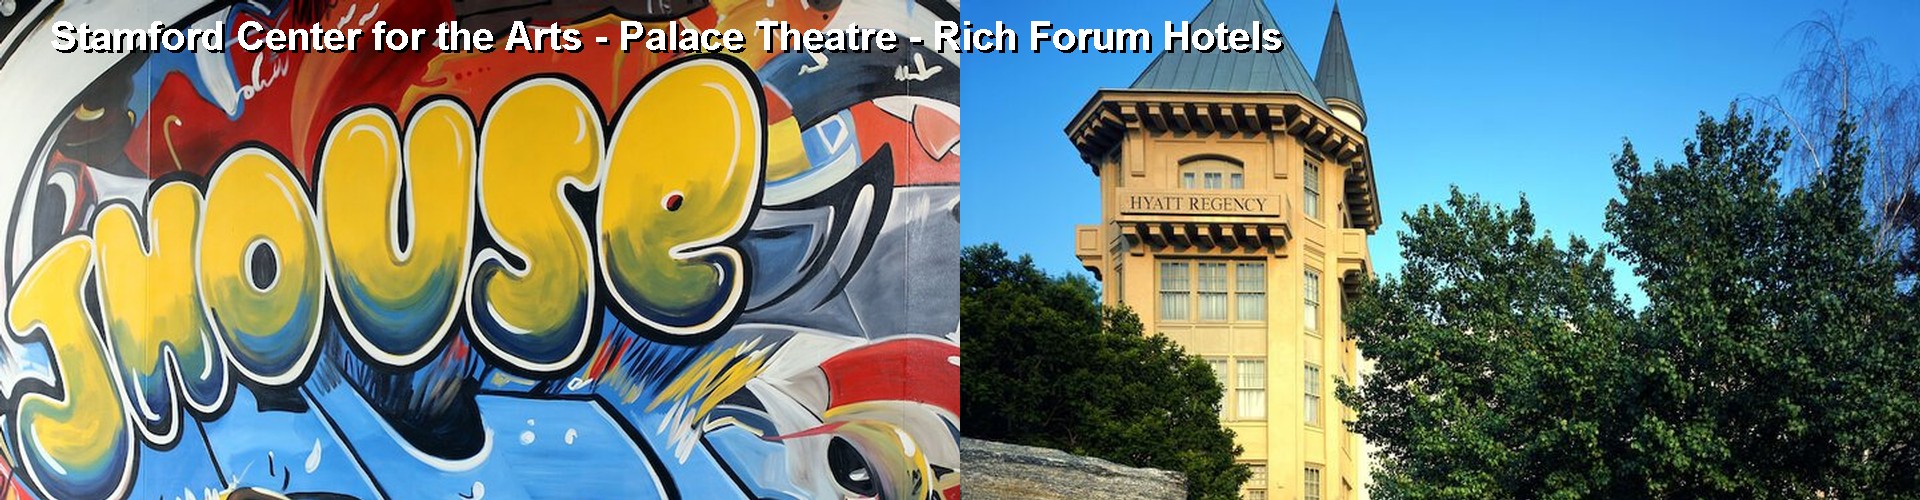 4 Best Hotels near Stamford Center for the Arts - Palace Theatre - Rich Forum